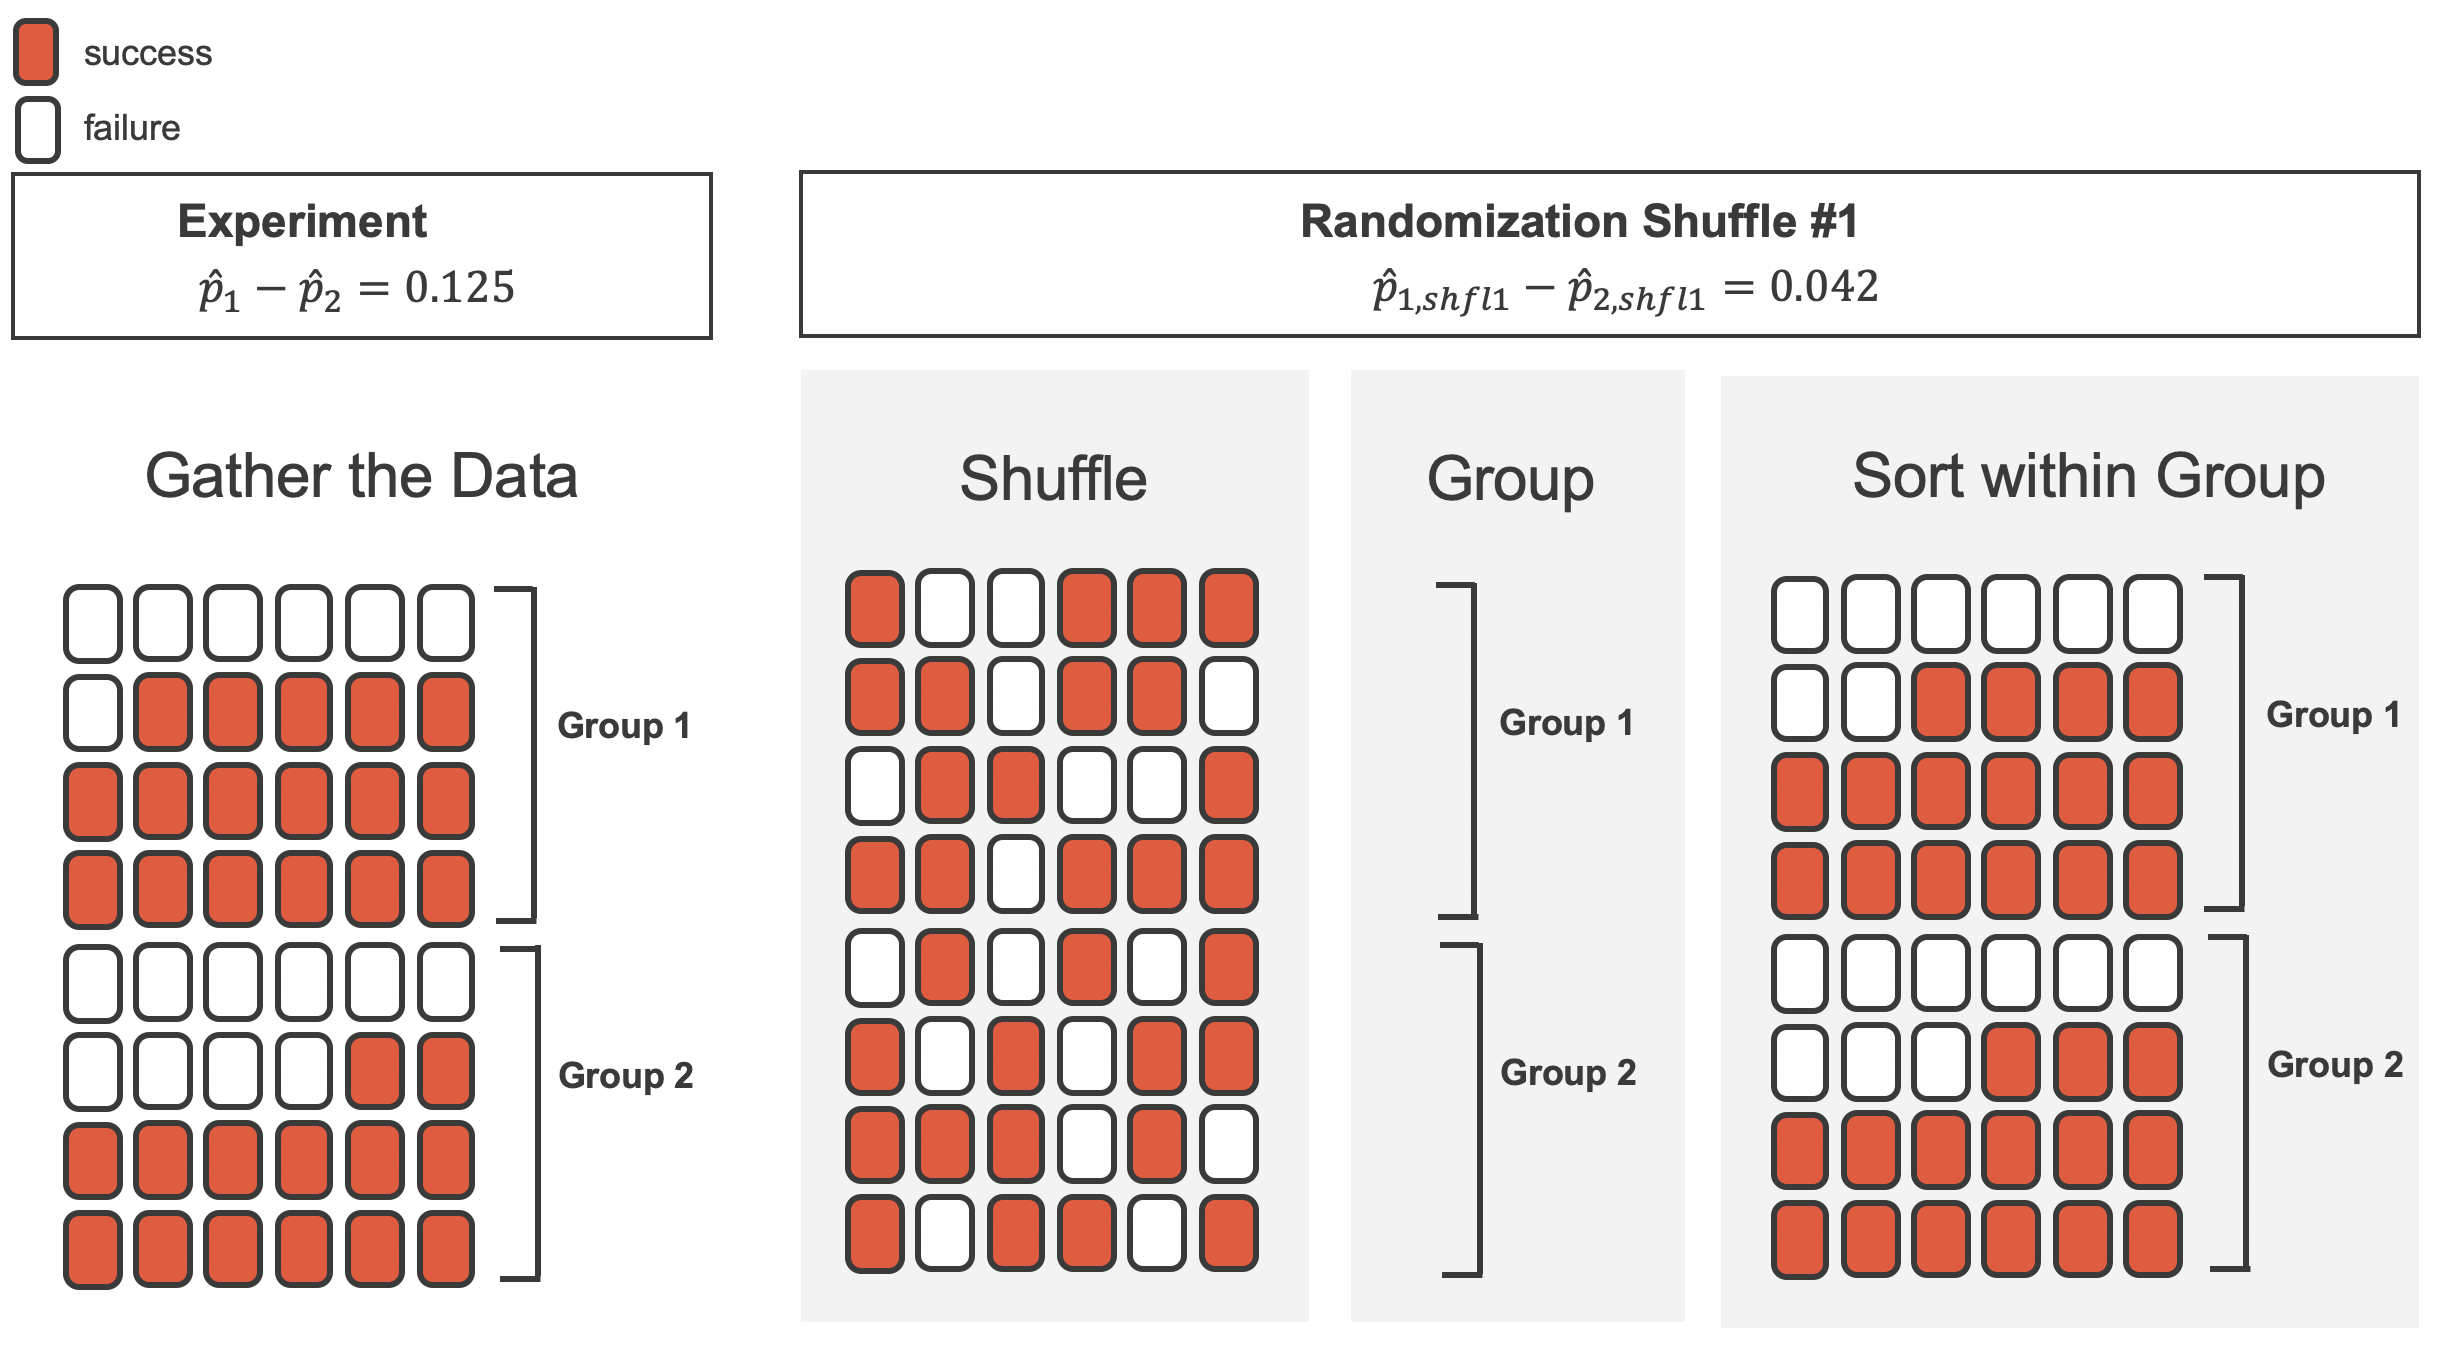 48 red and white cards are show in three panels.  The first panel represents original data and original allocation of Group 1 and Group 2 (in the original data there are 7 white cards in Group 1 and 10 white cards in Group 2).  The second panel represents the shuffled red and white cards that are randomly assigned as Group 1 and Group 2.  The third panel has the cards sorted according to the random assignment of Group 1 and Group 2.  In the third panel there are 8 white cards in the Group 1 and 9 white cards in Group 2.